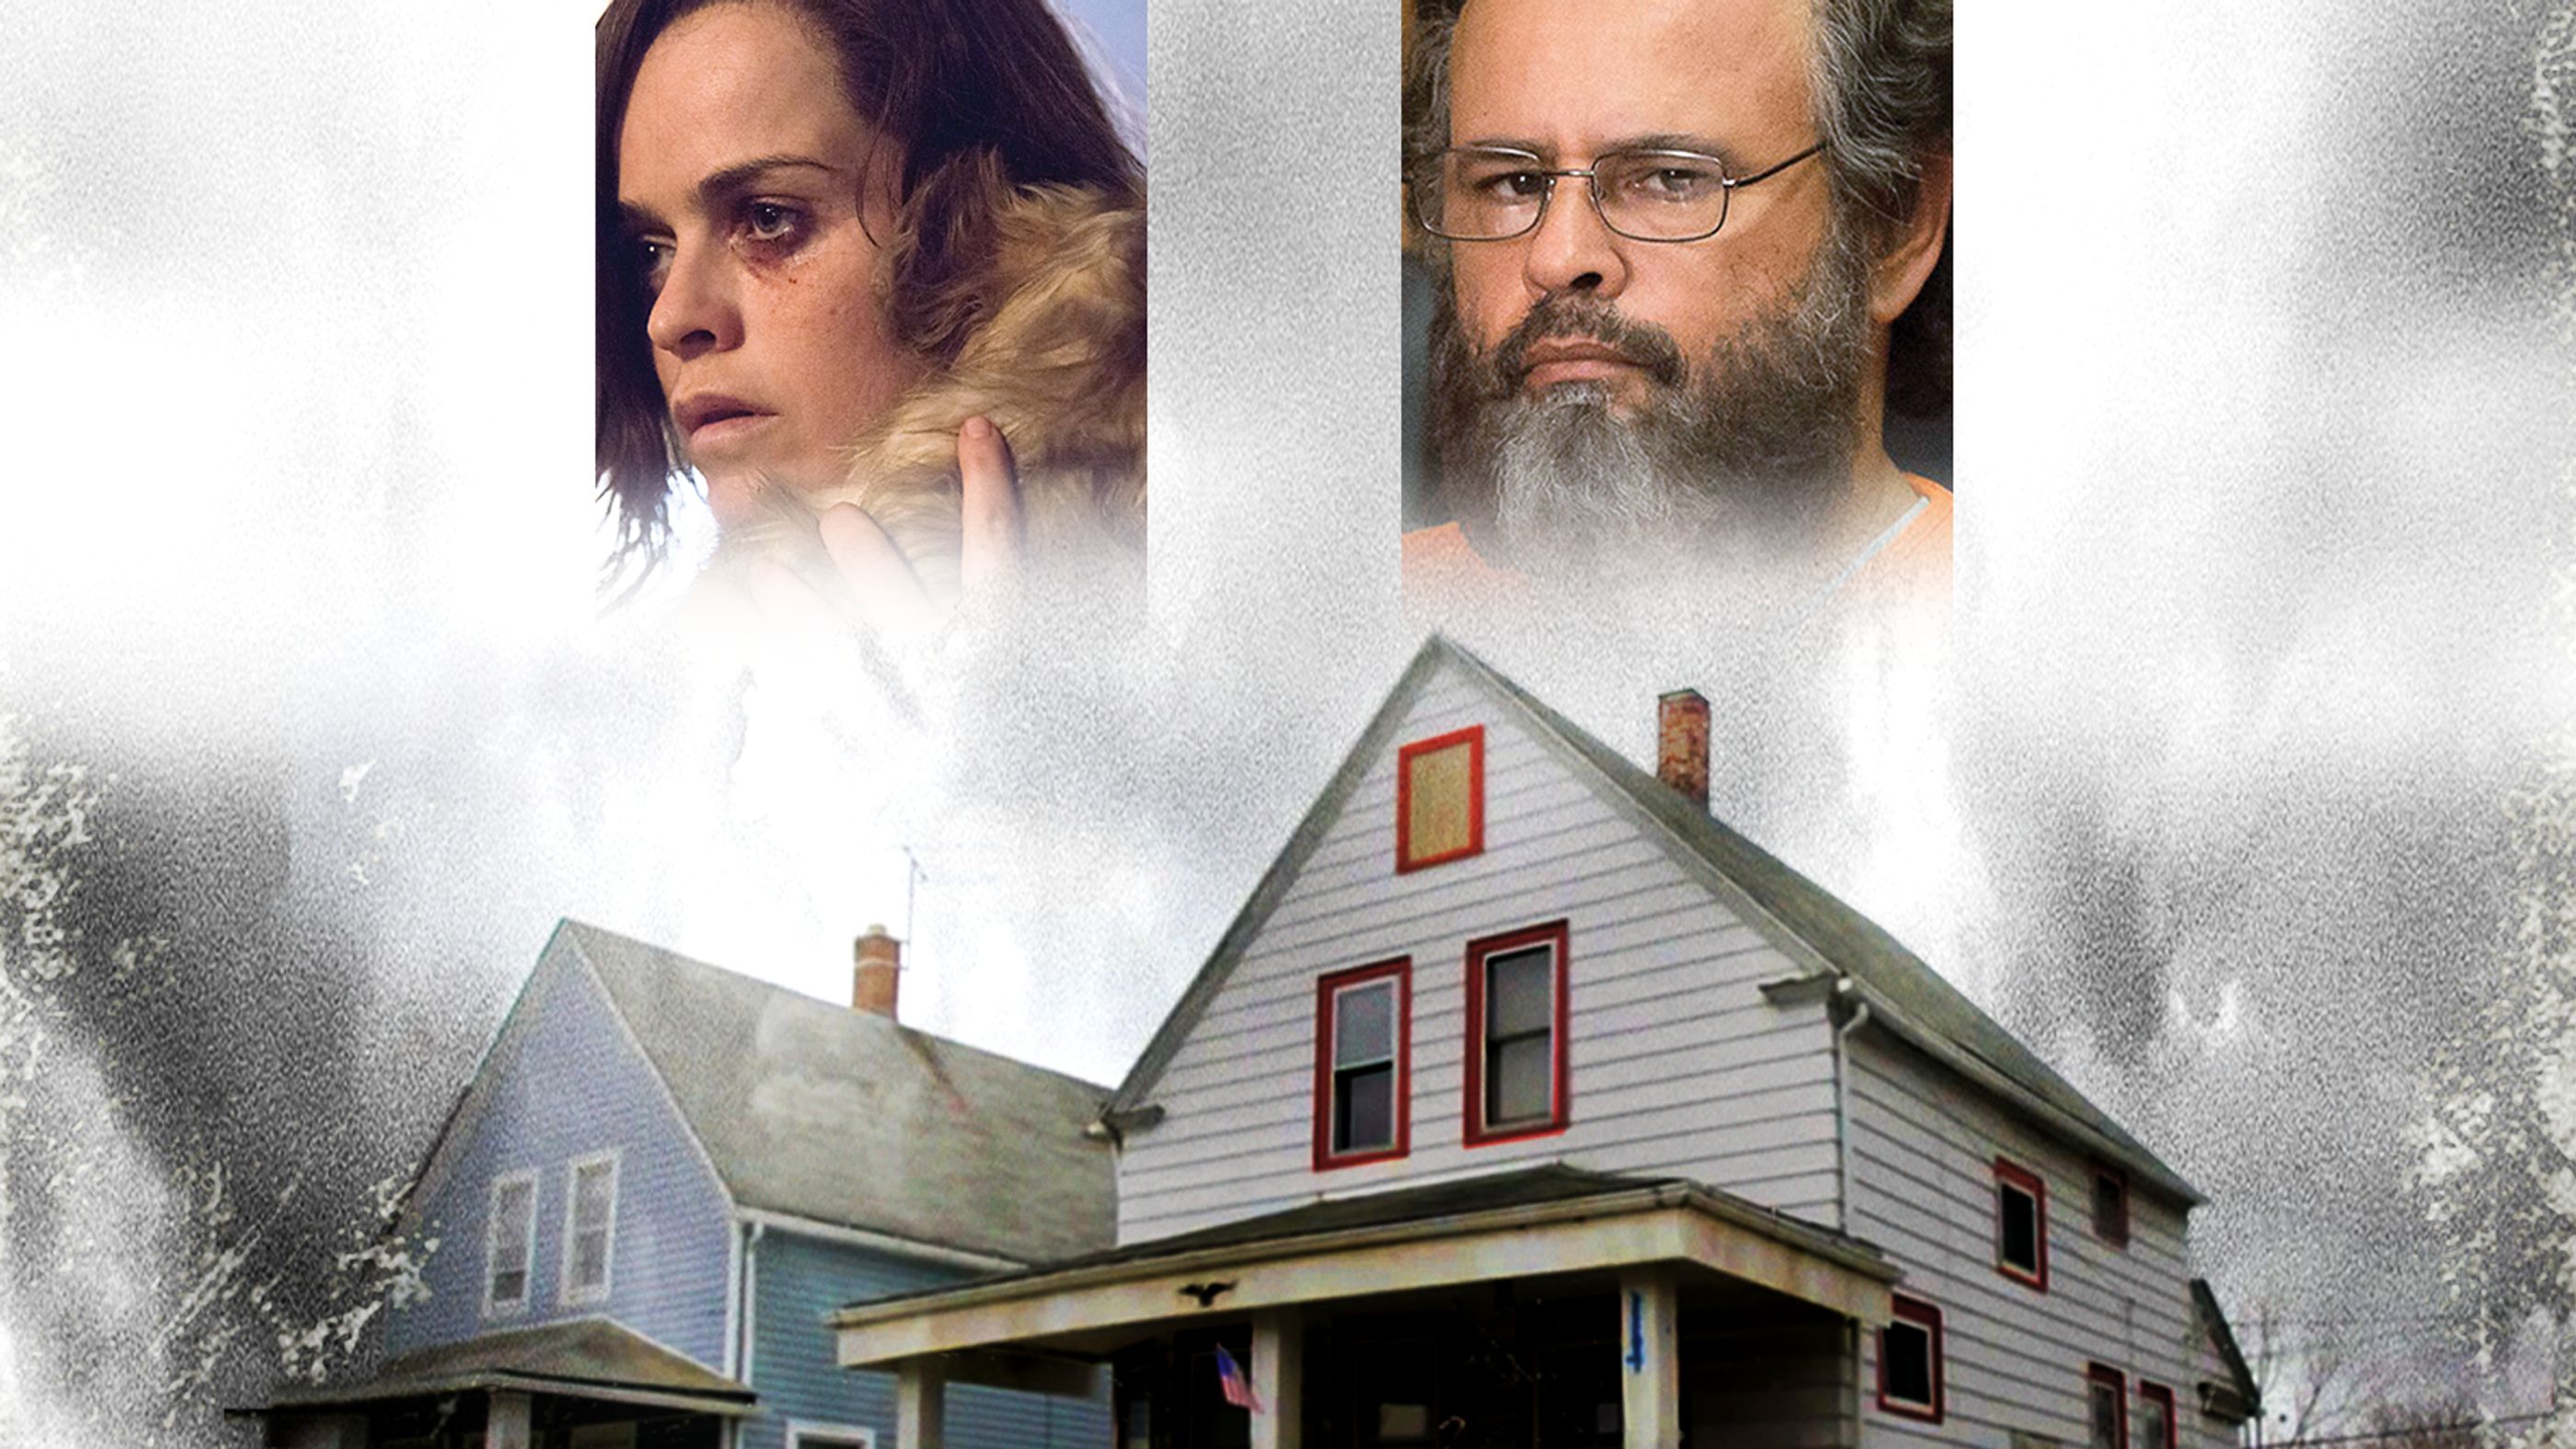 Cleveland Abduction Full Movie Movies Anywhere